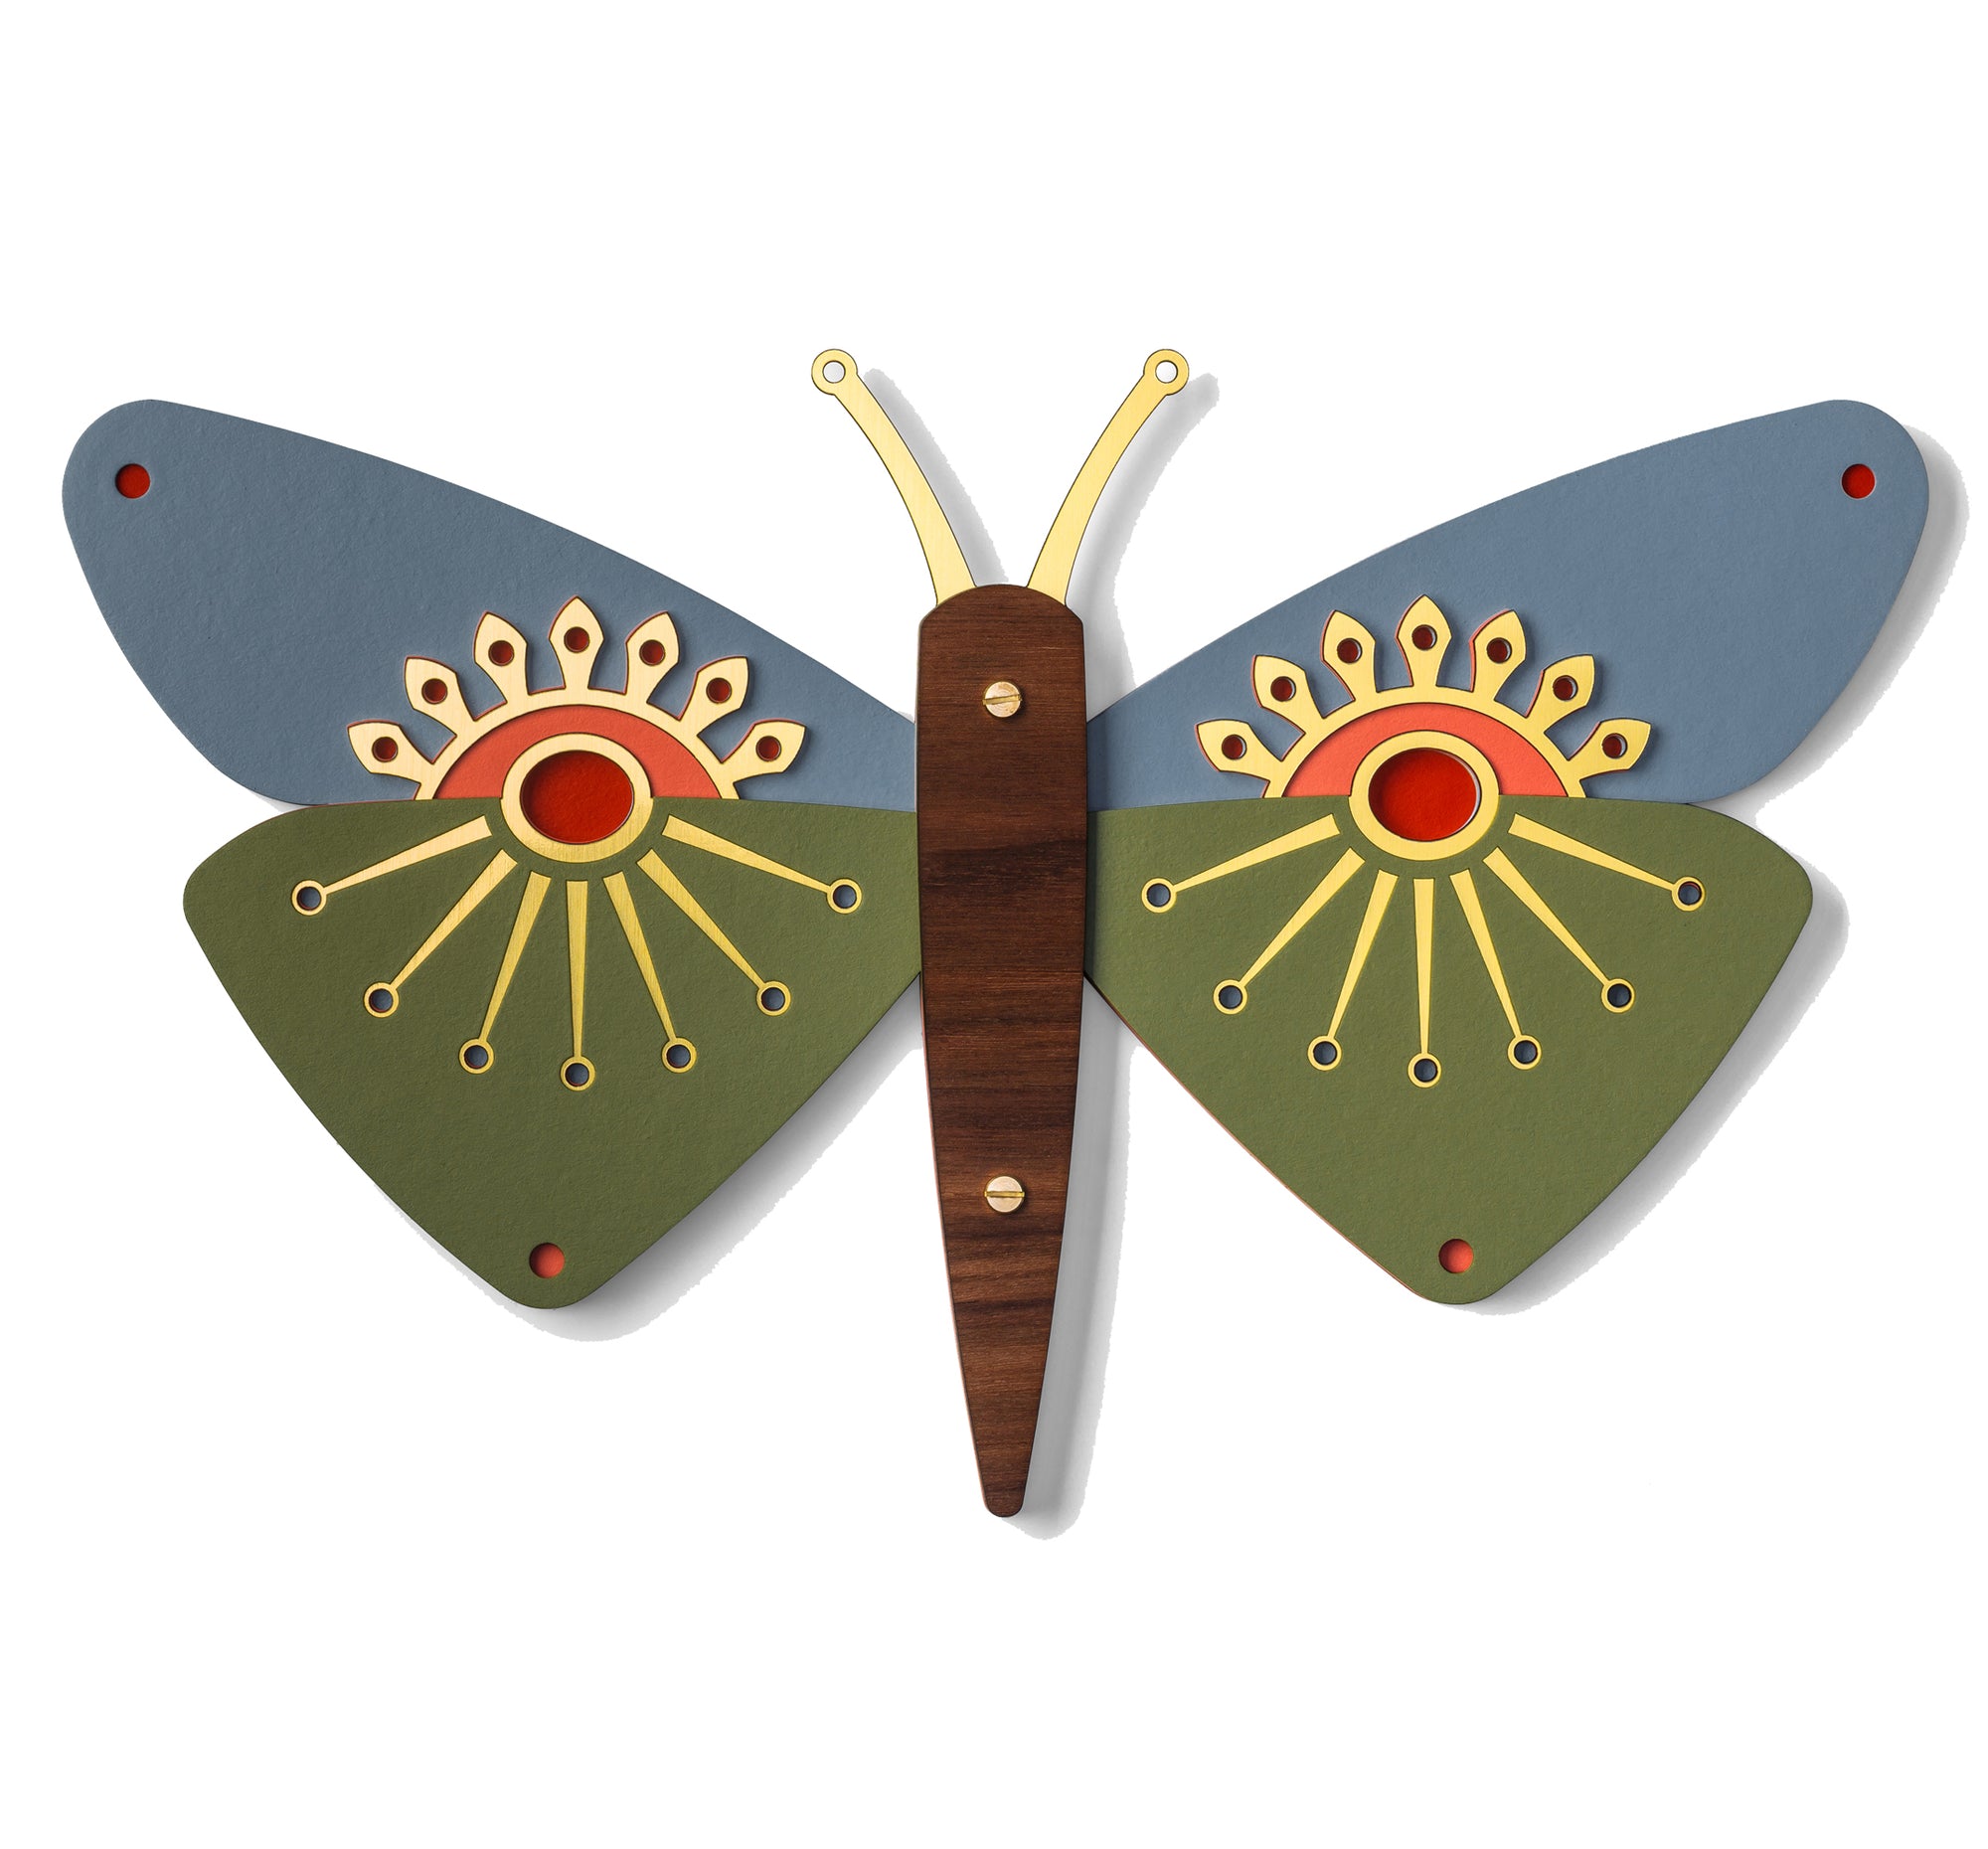 Wooden Butterflies to Hang on Wall as Poster or Decals